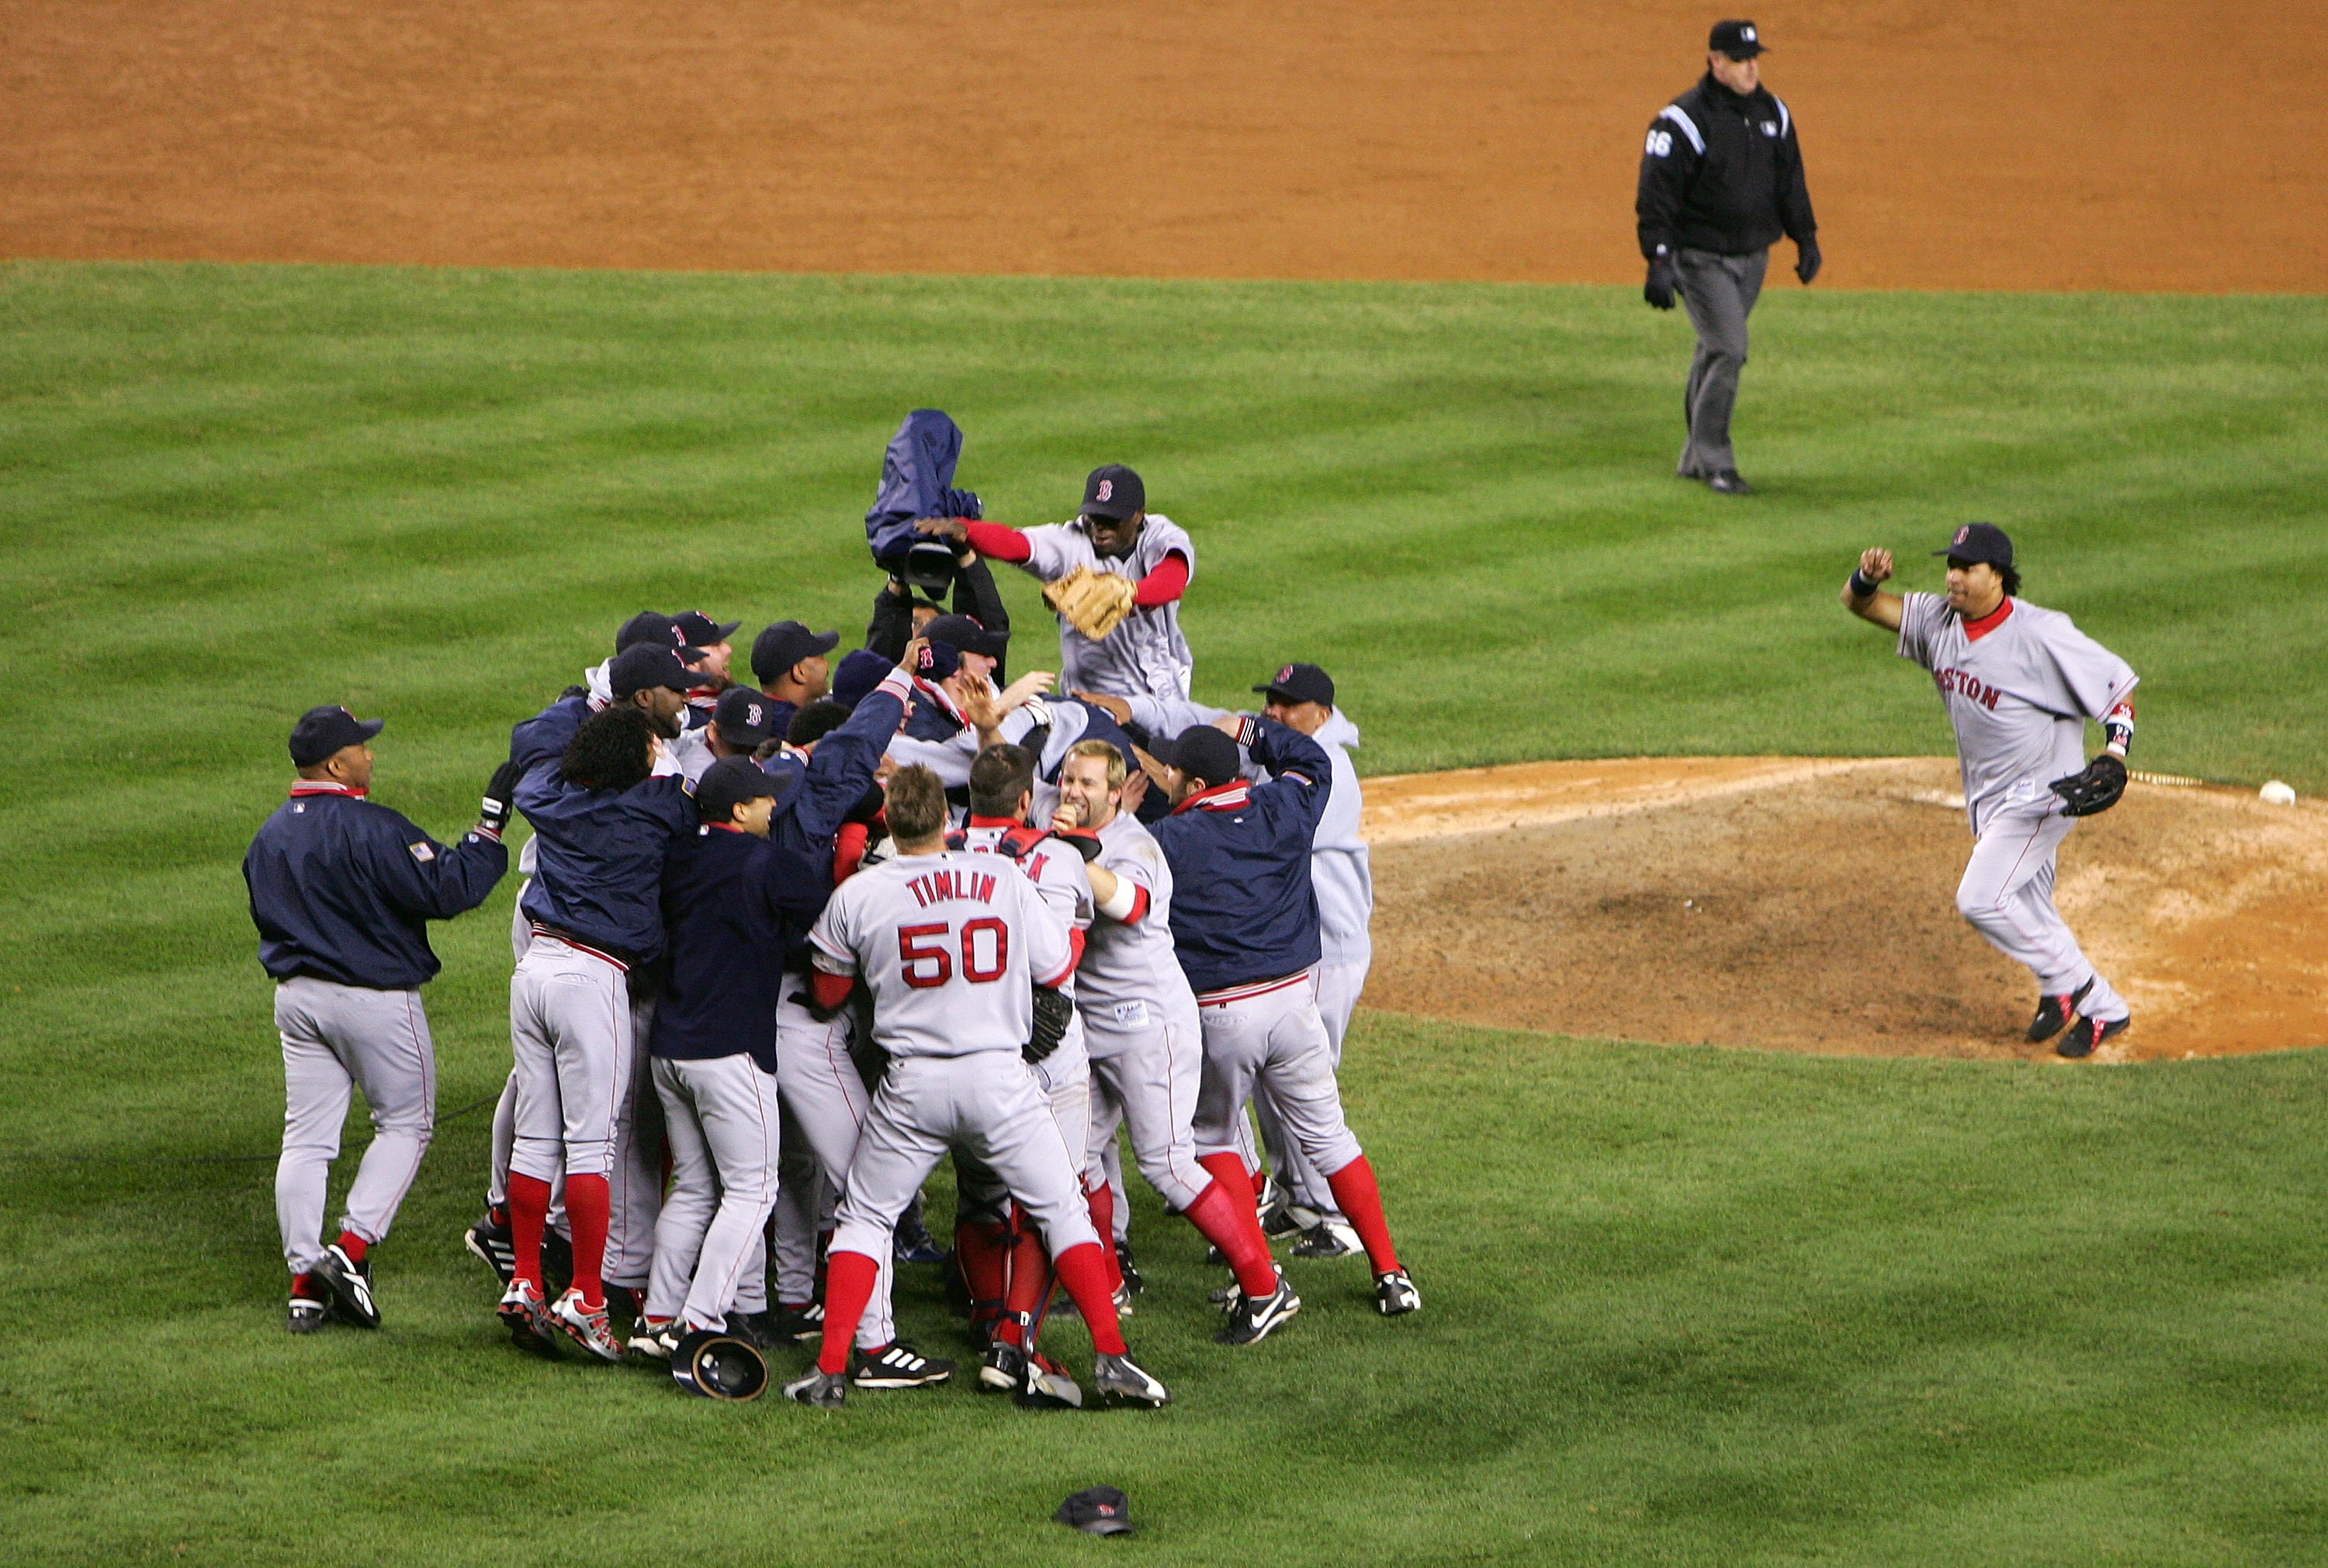 NEW YORK - OCTOBER 20: The Boston Red Sox celebrate after defeating the New York Yankees 10-3 to win game seven of the American League Championship Series on October 20, 2004 at Yankee Stadium in the Bronx borough of New York City. (Photo by Ezra Shaw/Getty Images)